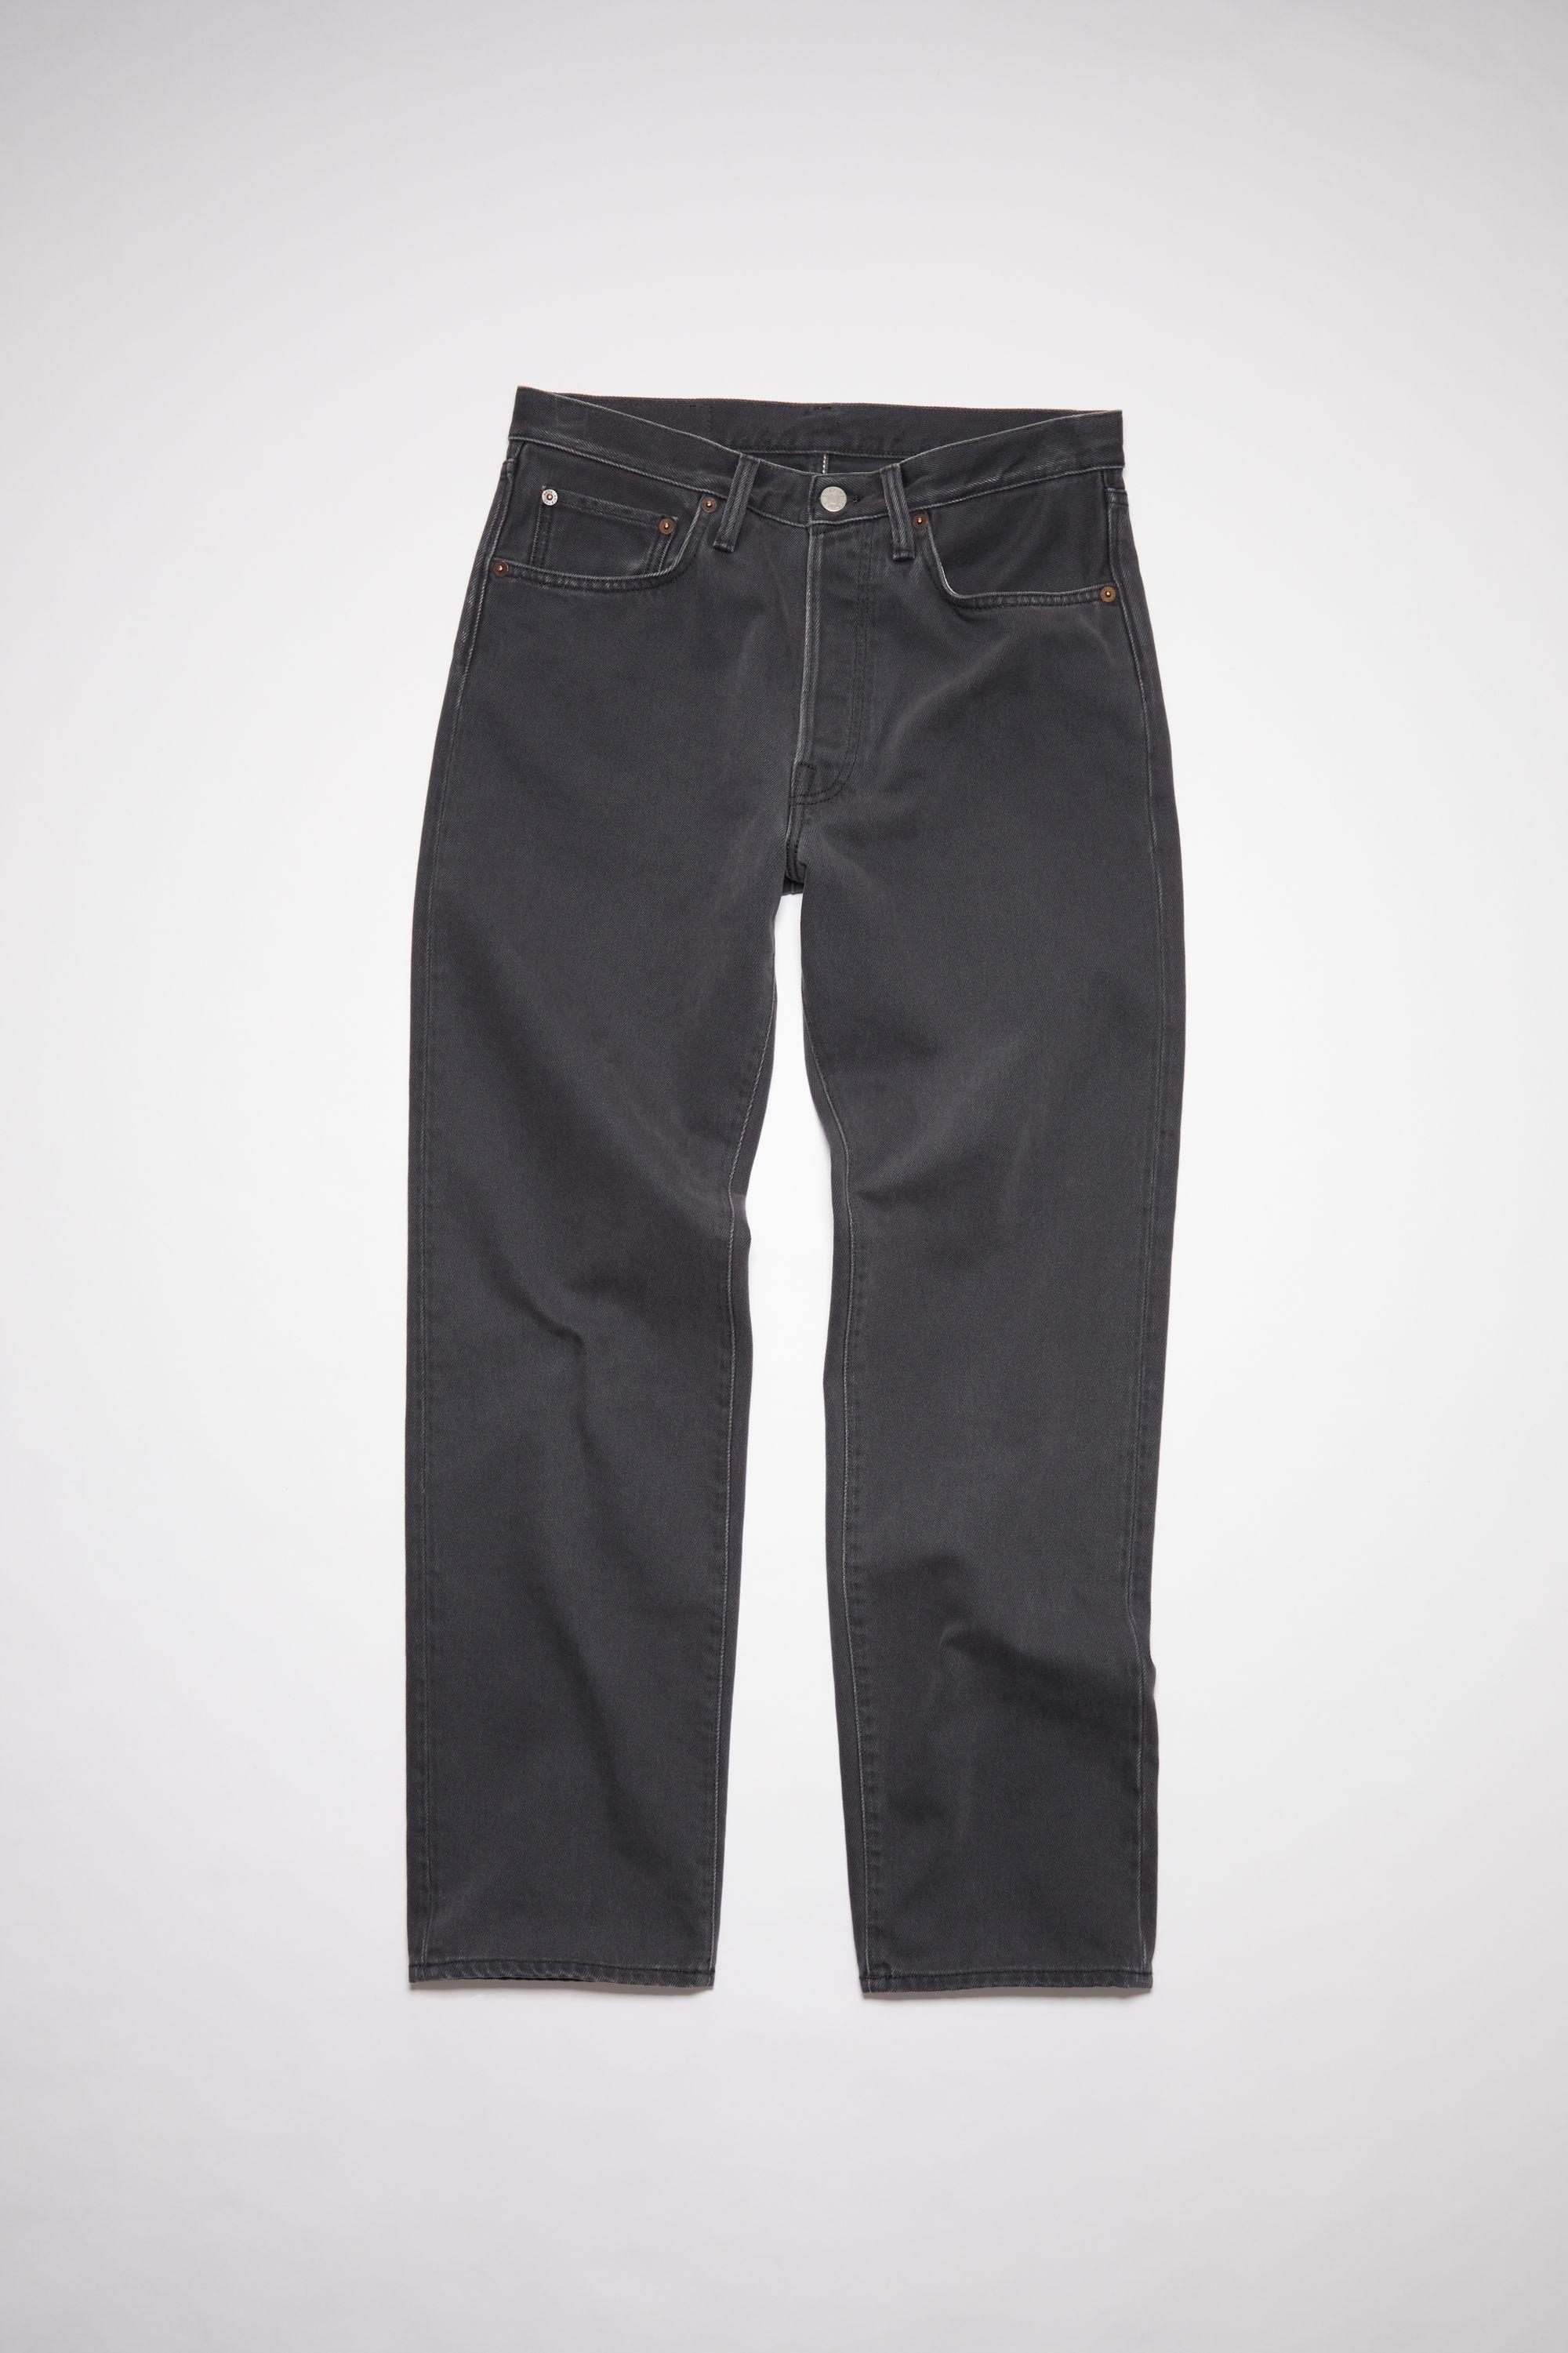 Acne Studios Denim 2003 Faded Black Relaxed Fit Jeans - 2003 in Dark ...